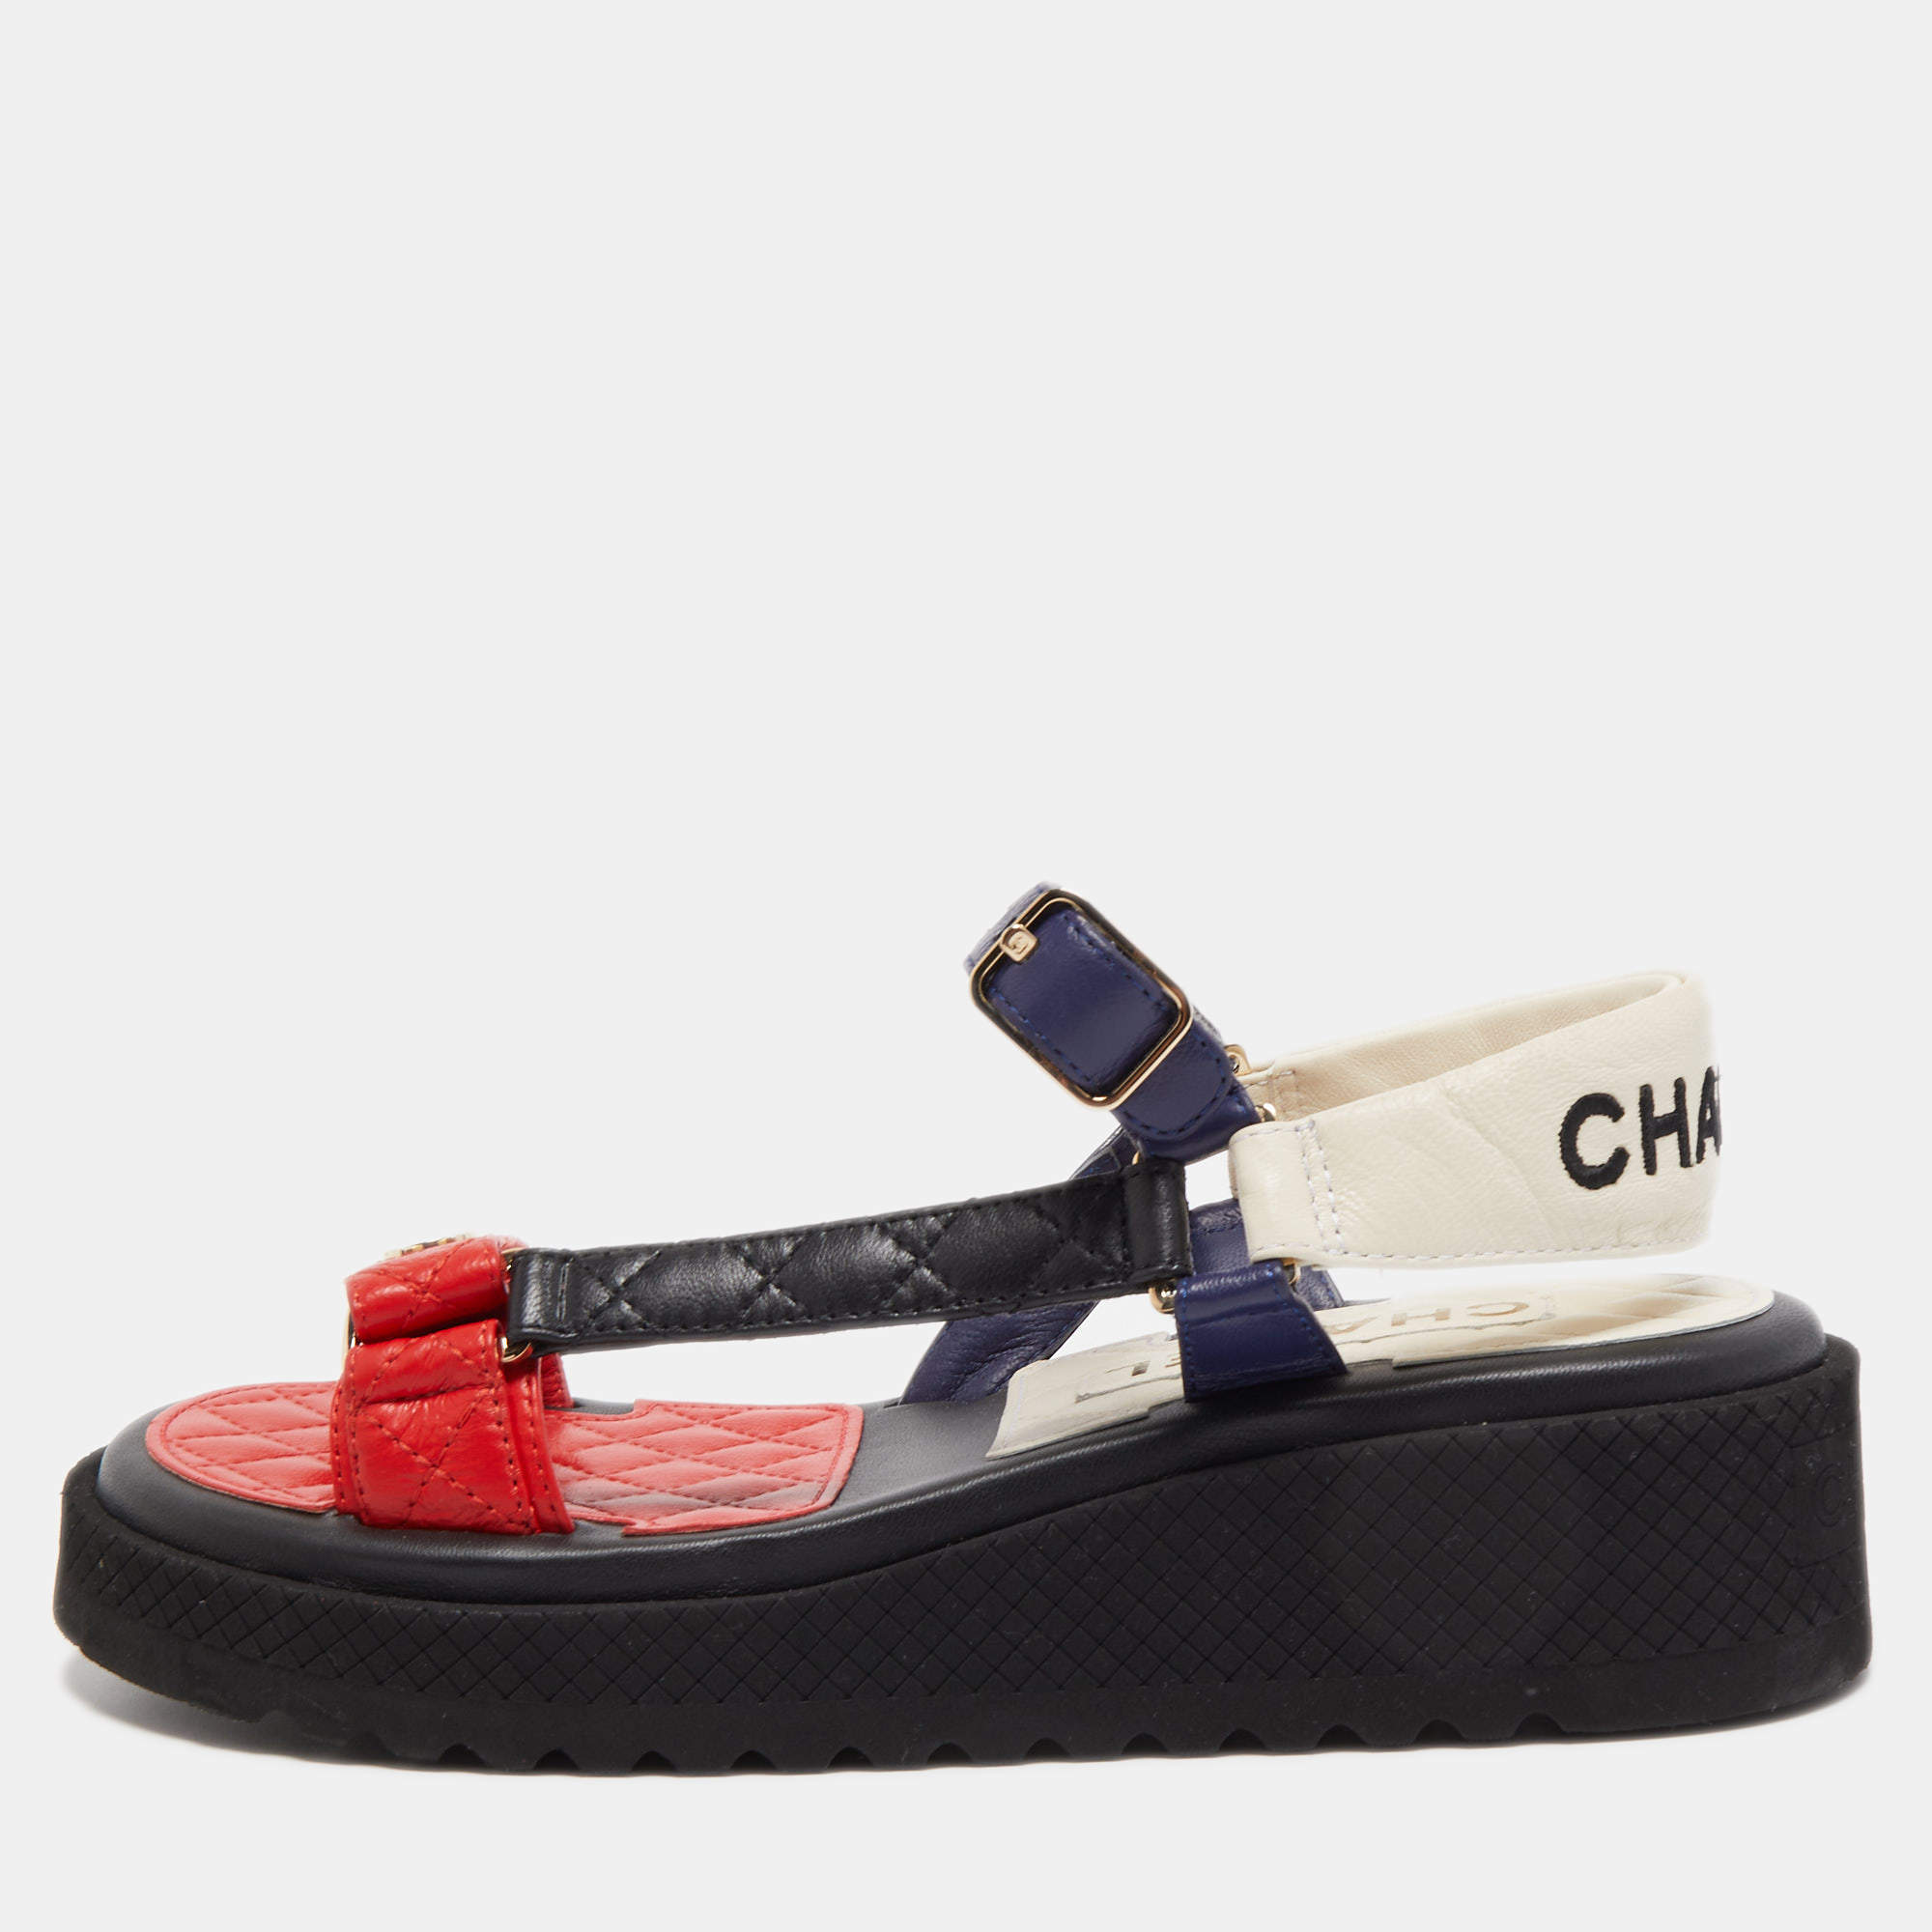 Chanel Chunky Quilted Flatform Sandals